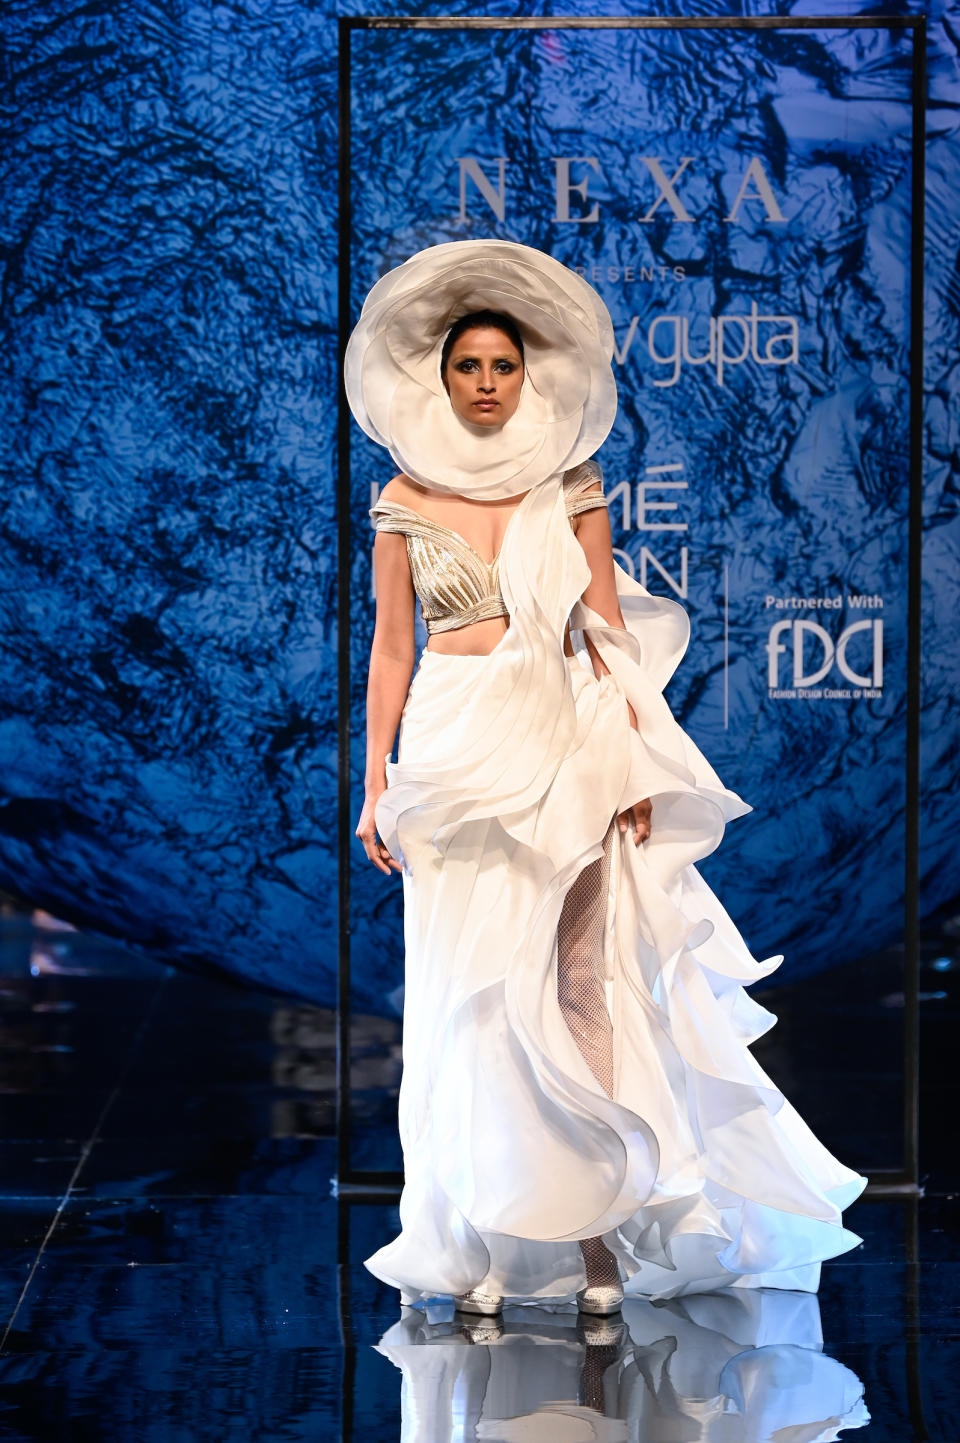 A model walks the ramp during Nexa Presents Gaurav Gupta show at the FDCI x Lakmé Fashion Week 2022 at Jio World Convention Centre in Mumbai, India on 15th October 2022.

Photo : PS Images / FDCI x Lakme Fashion Week / RISE Worldwide